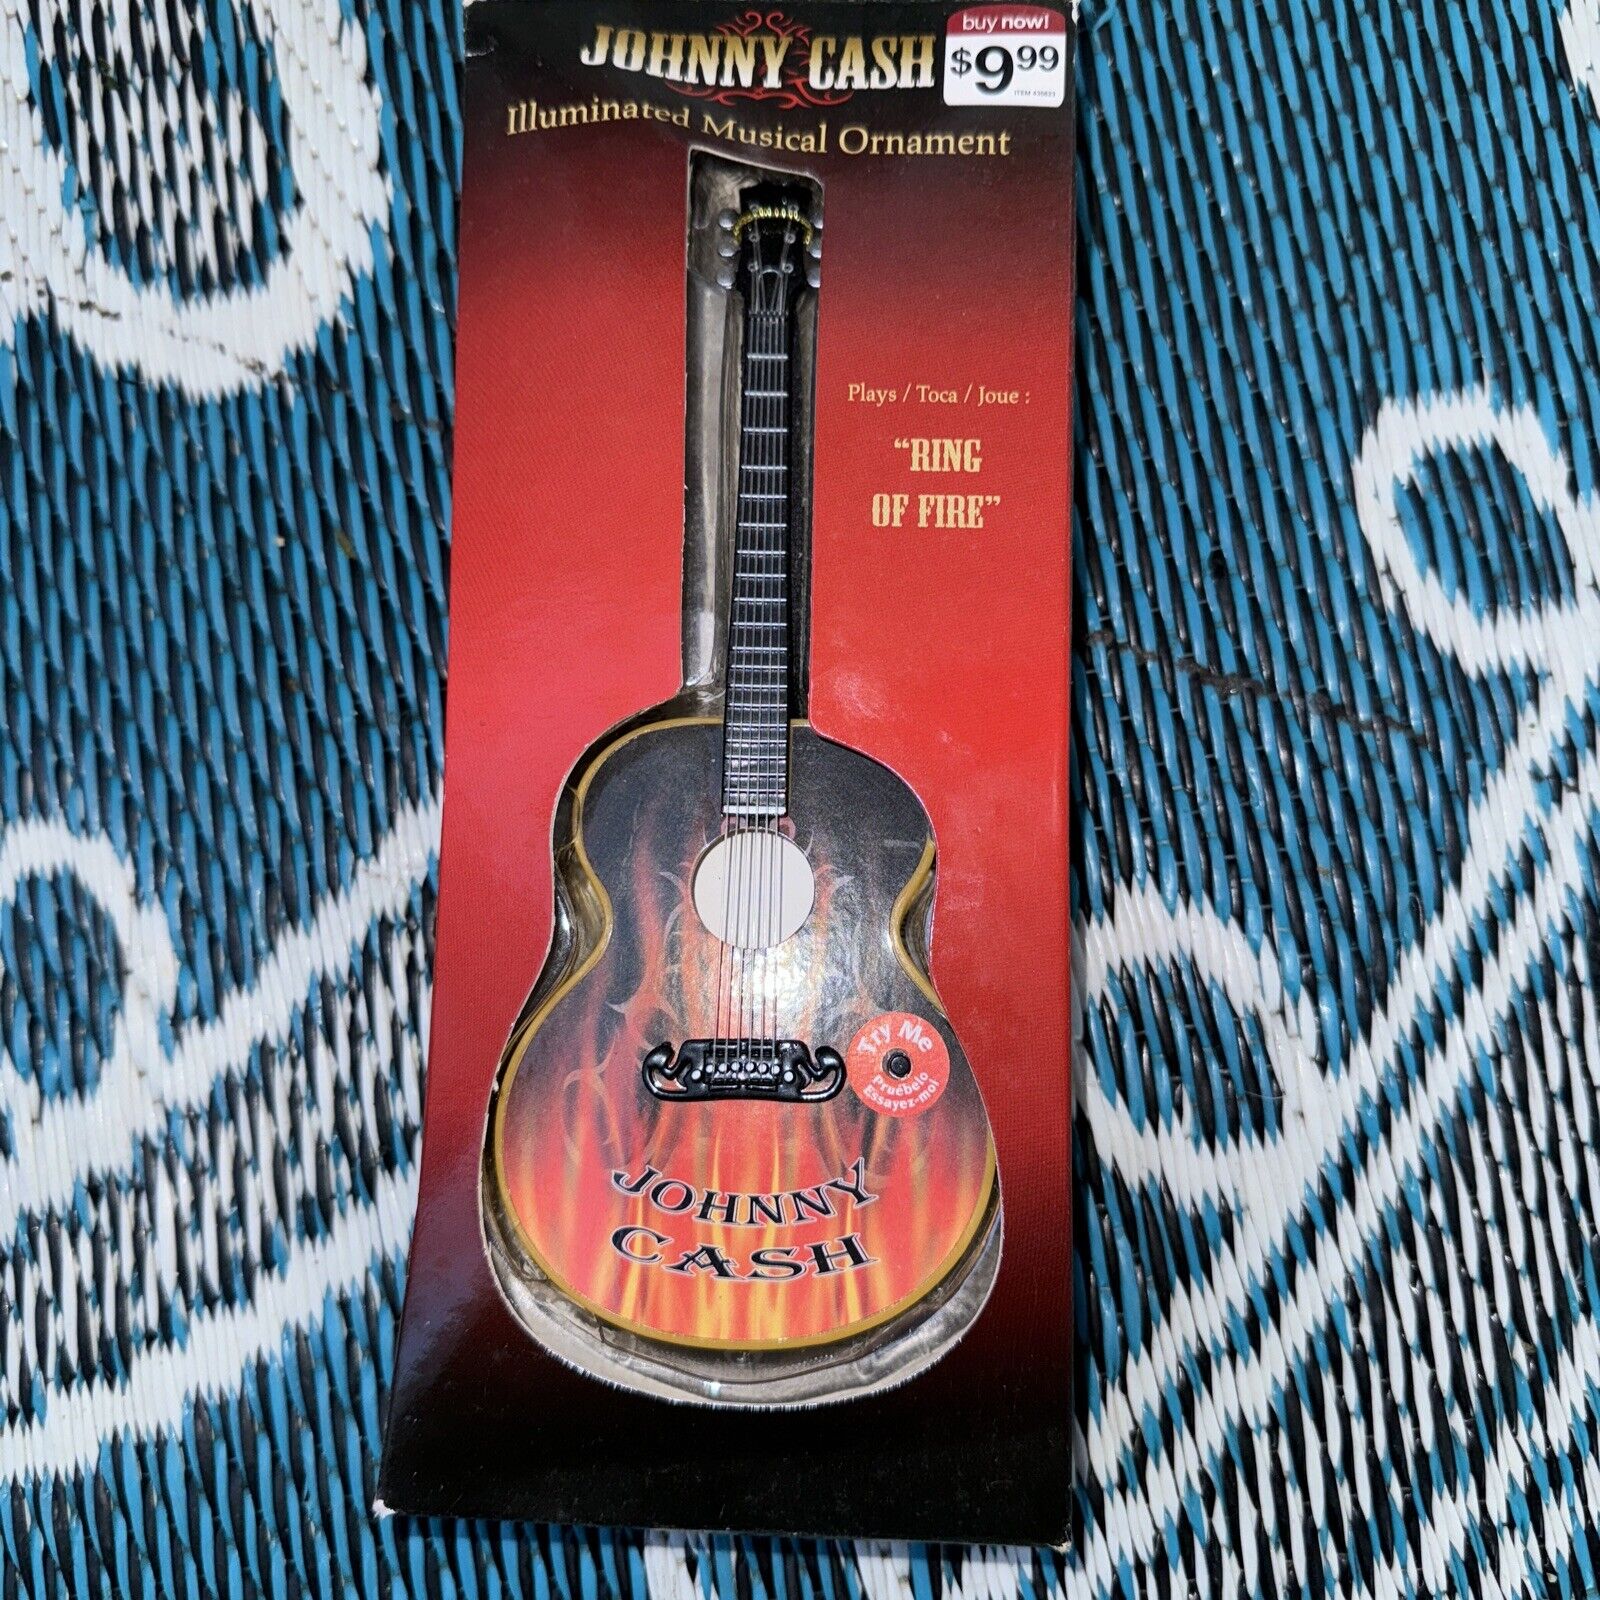 Johnny Cash Illuminated Guitar Musical Ornament Plays Ring Of Fire 2013 NEW